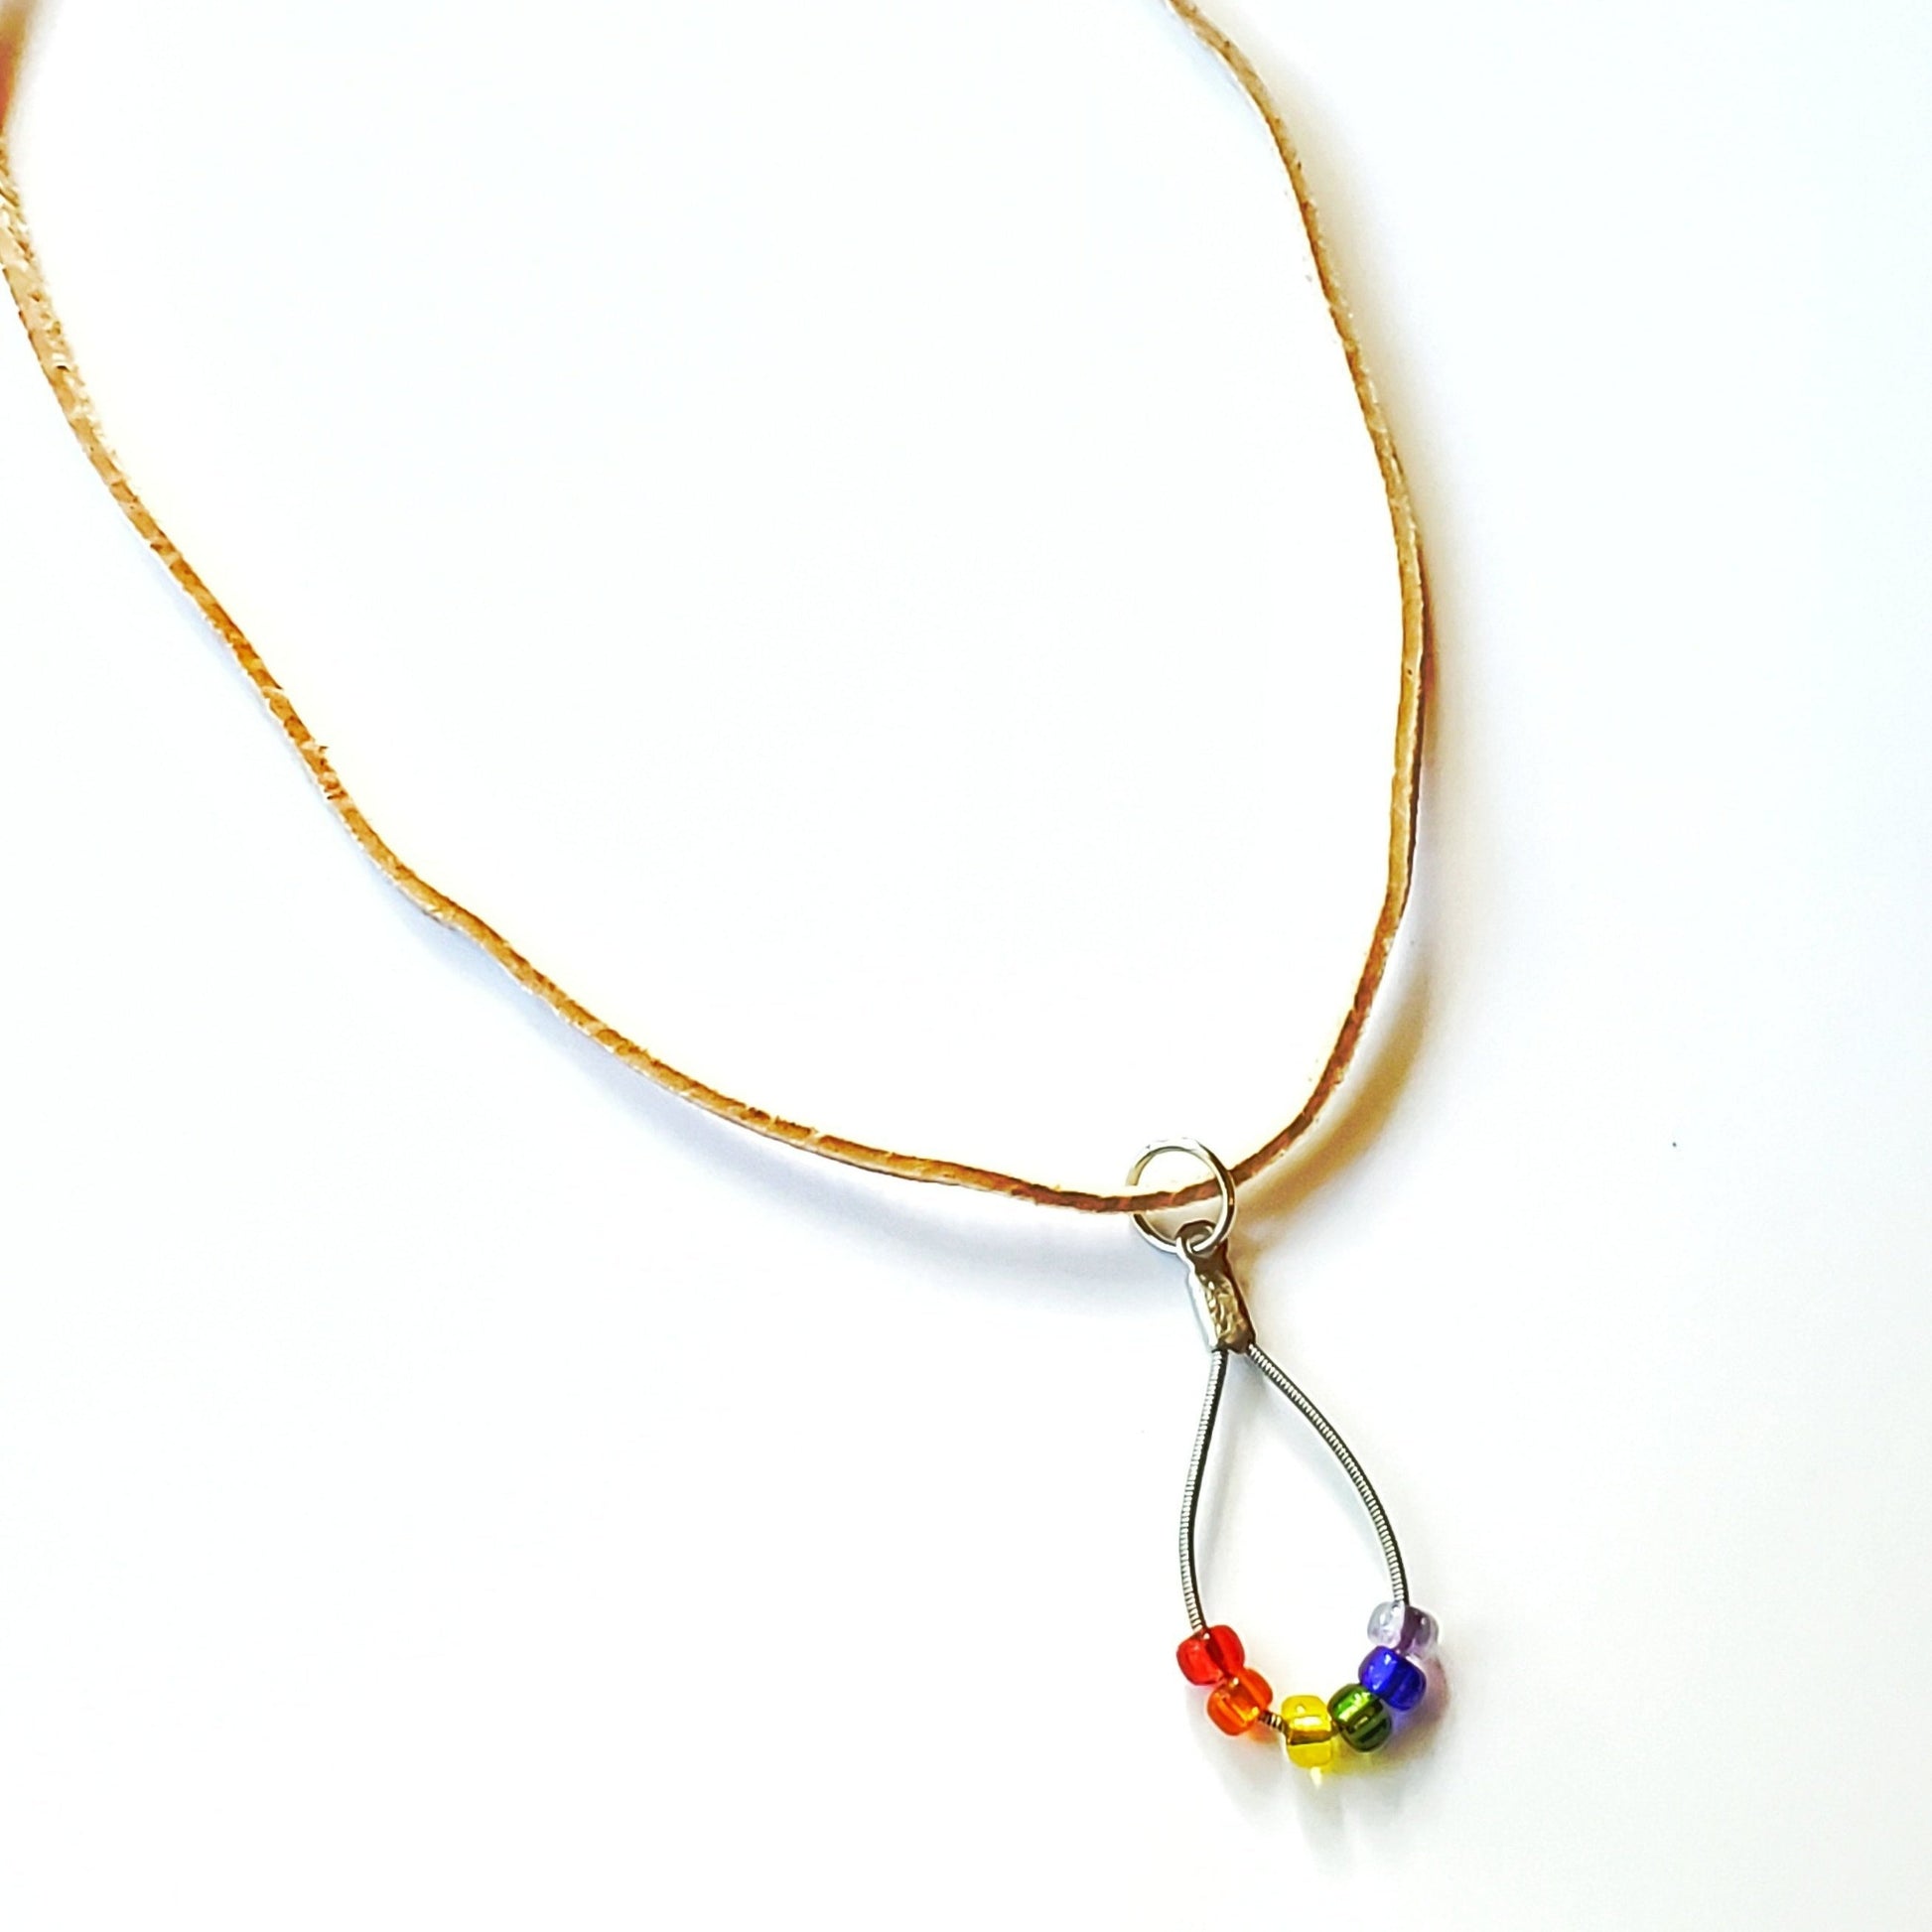 necklace made from an upcycled guitar string - 6 glass beads represent the colours of the LGBTQ flag (red, orange, yellow, green, blue and purple) and a beige suede cord - white background